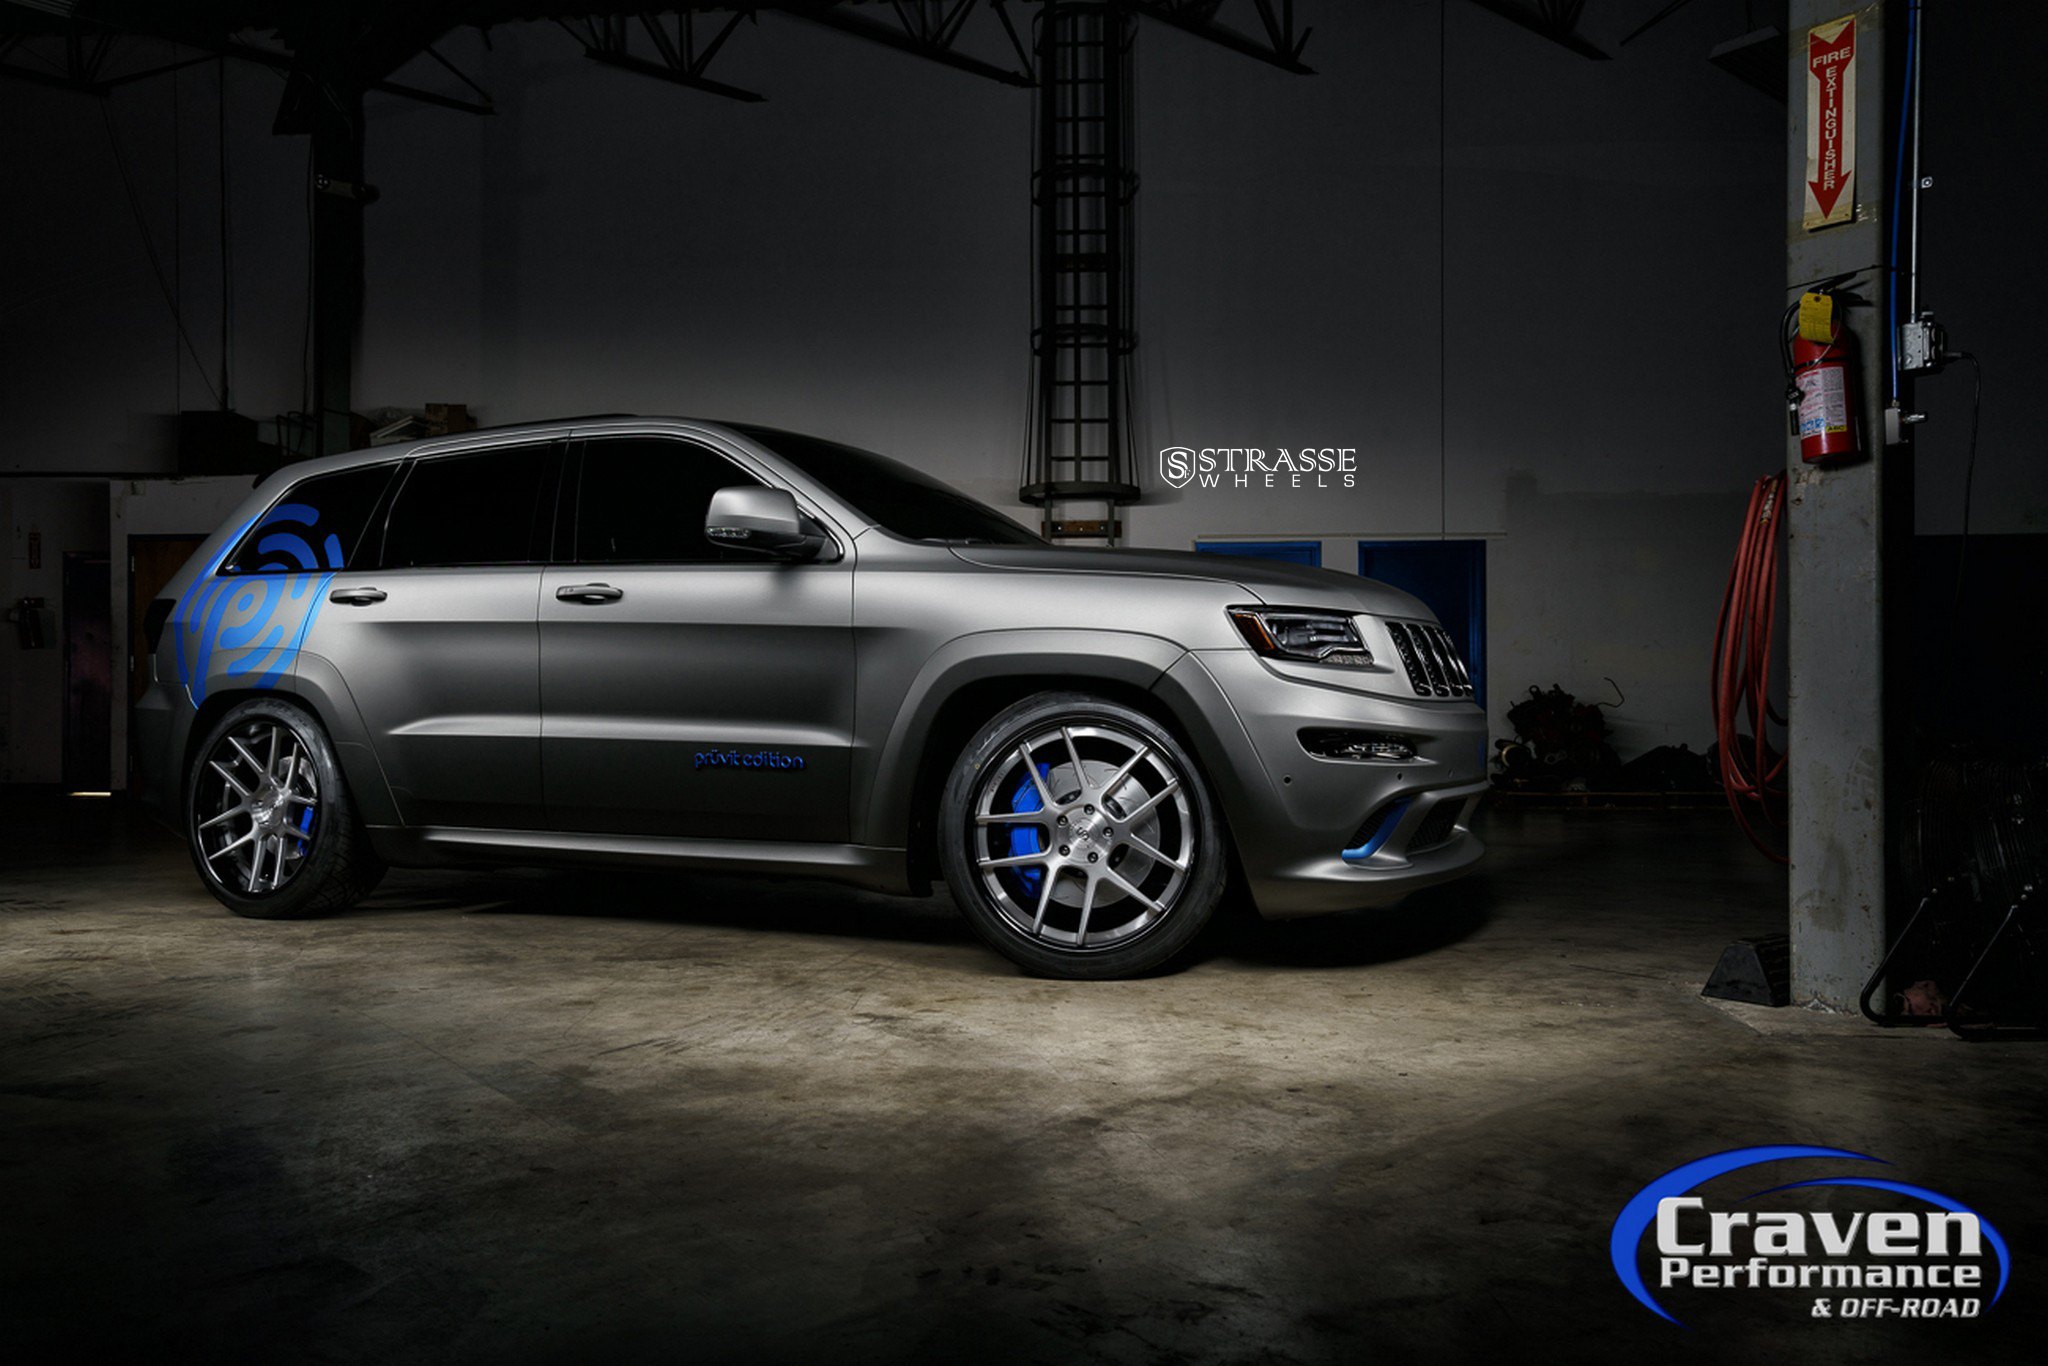 Strasse Wheels on Gray Matte Jeep Grand Cherokee - Photo by Strasse Forged